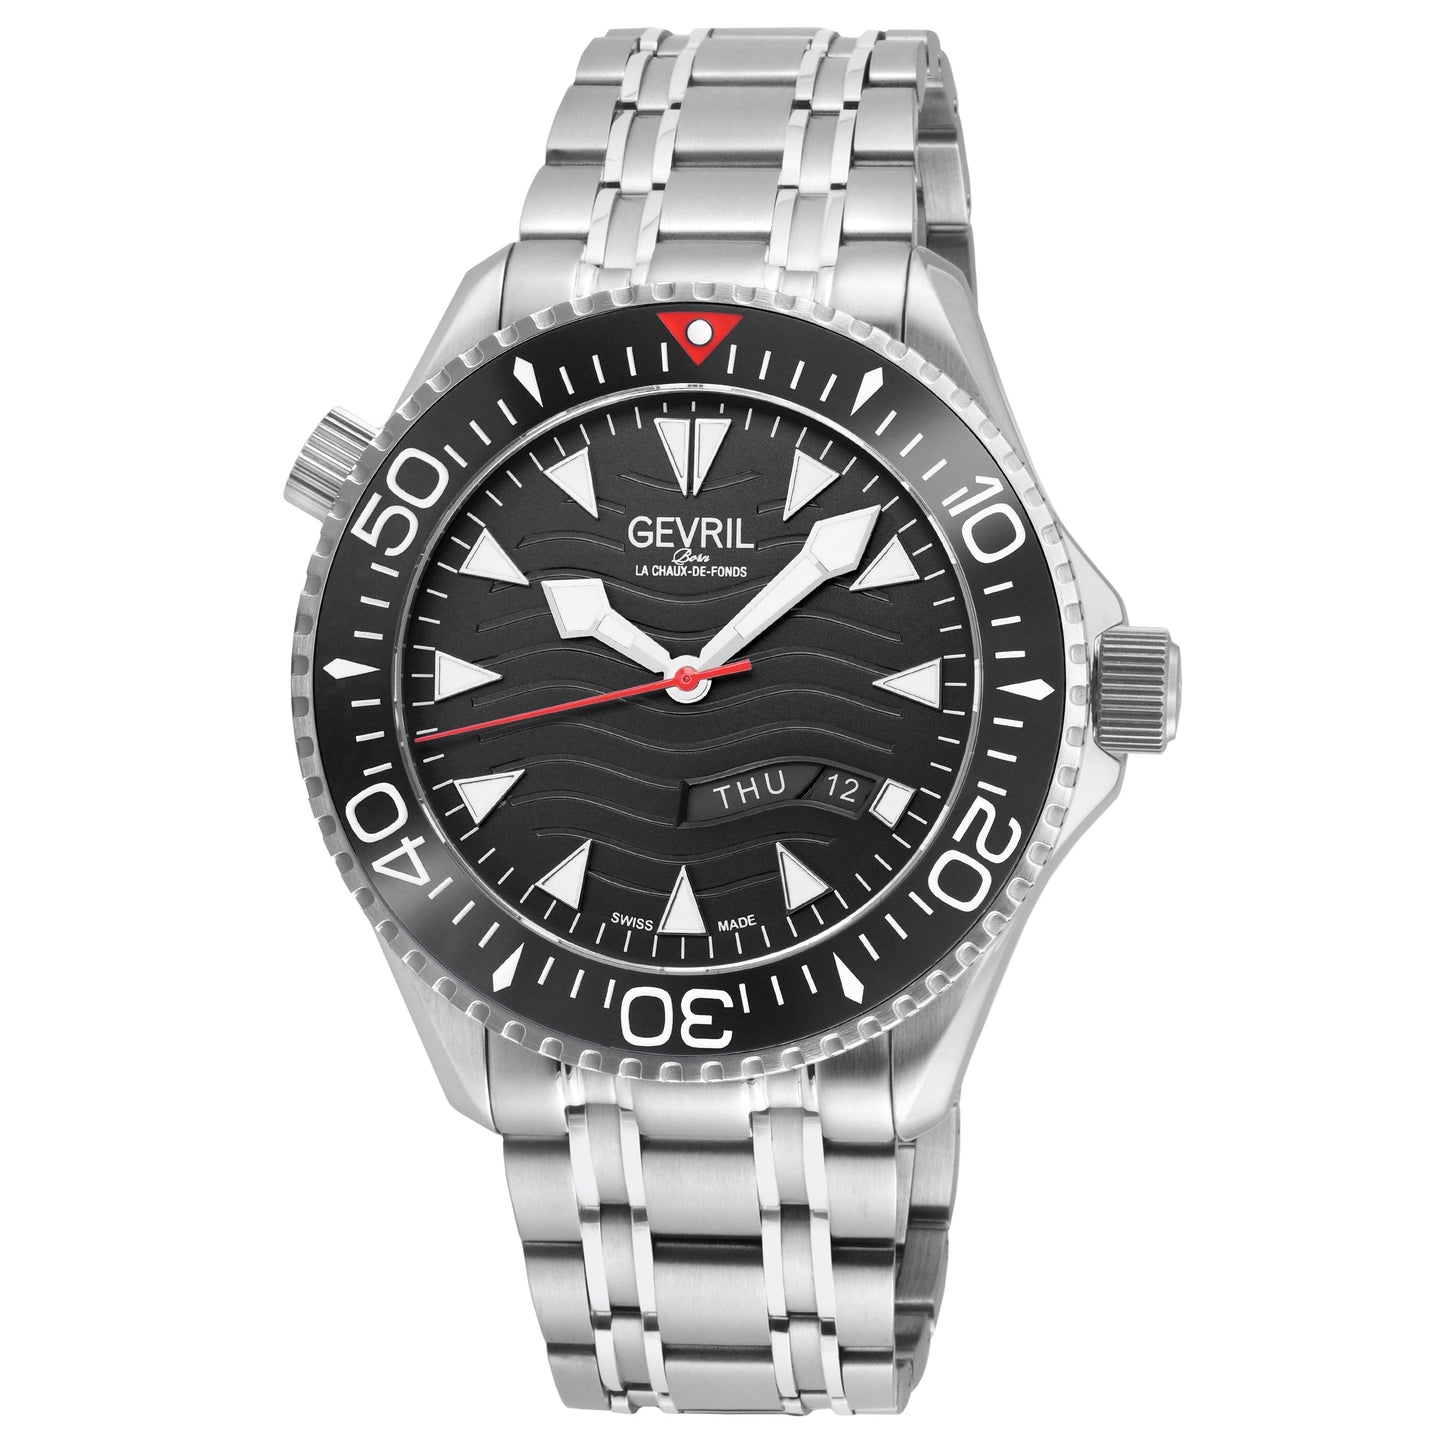 Gevril-Luxury-Swiss-Watches-Gevril Hudson Yards - Diver-48830B